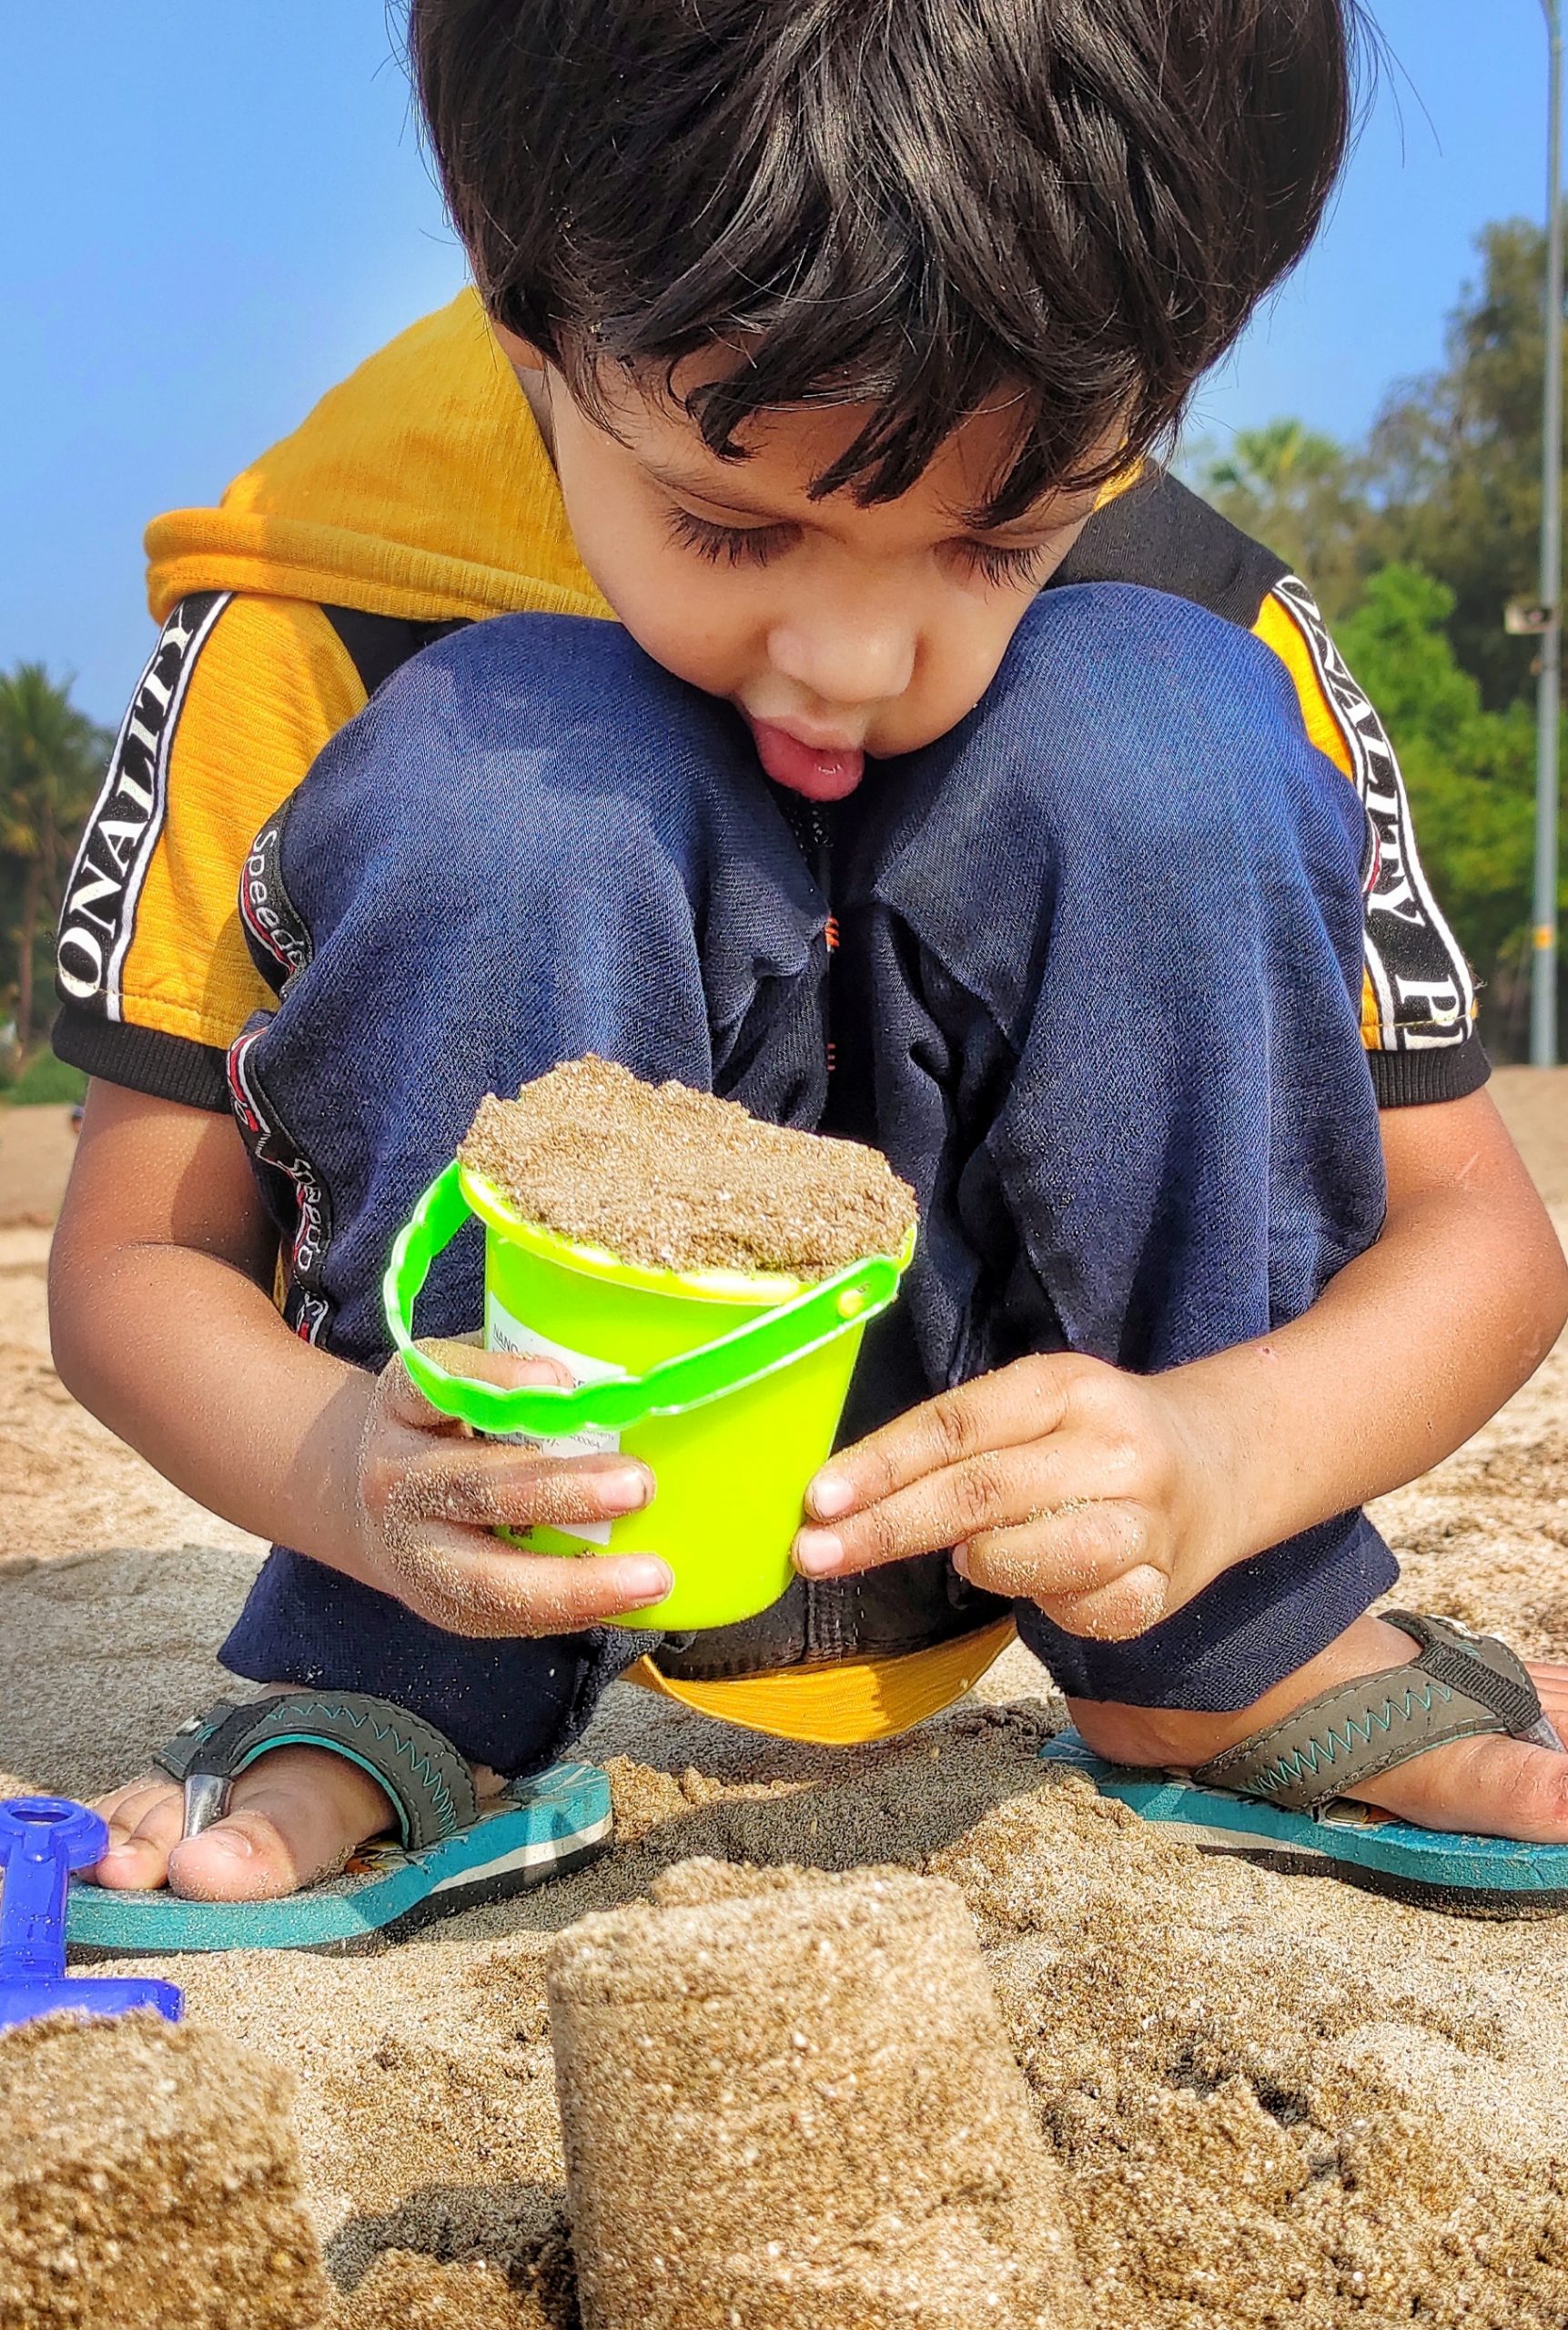 A kid playing with sand